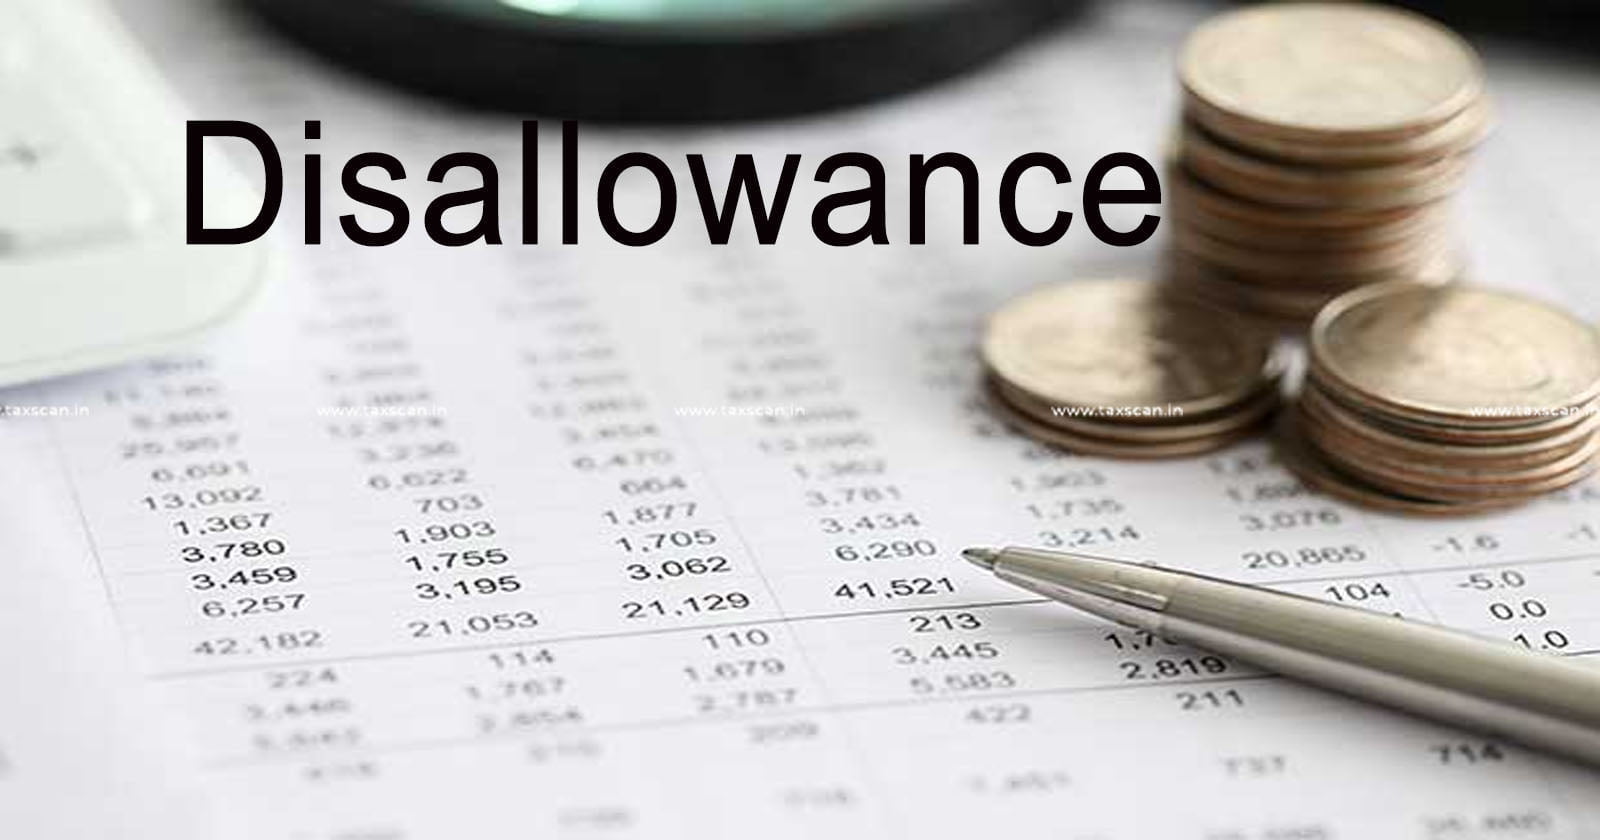 Disallowance cannot Exceed Exempt Income - ITAT upholds Deletion of Disallowance - Exempt Income - Deletion of Disallowance - Income Tax Act - Disallowance - Income - ITAT - under section 14A of Income Tax Act - TAXSCAN